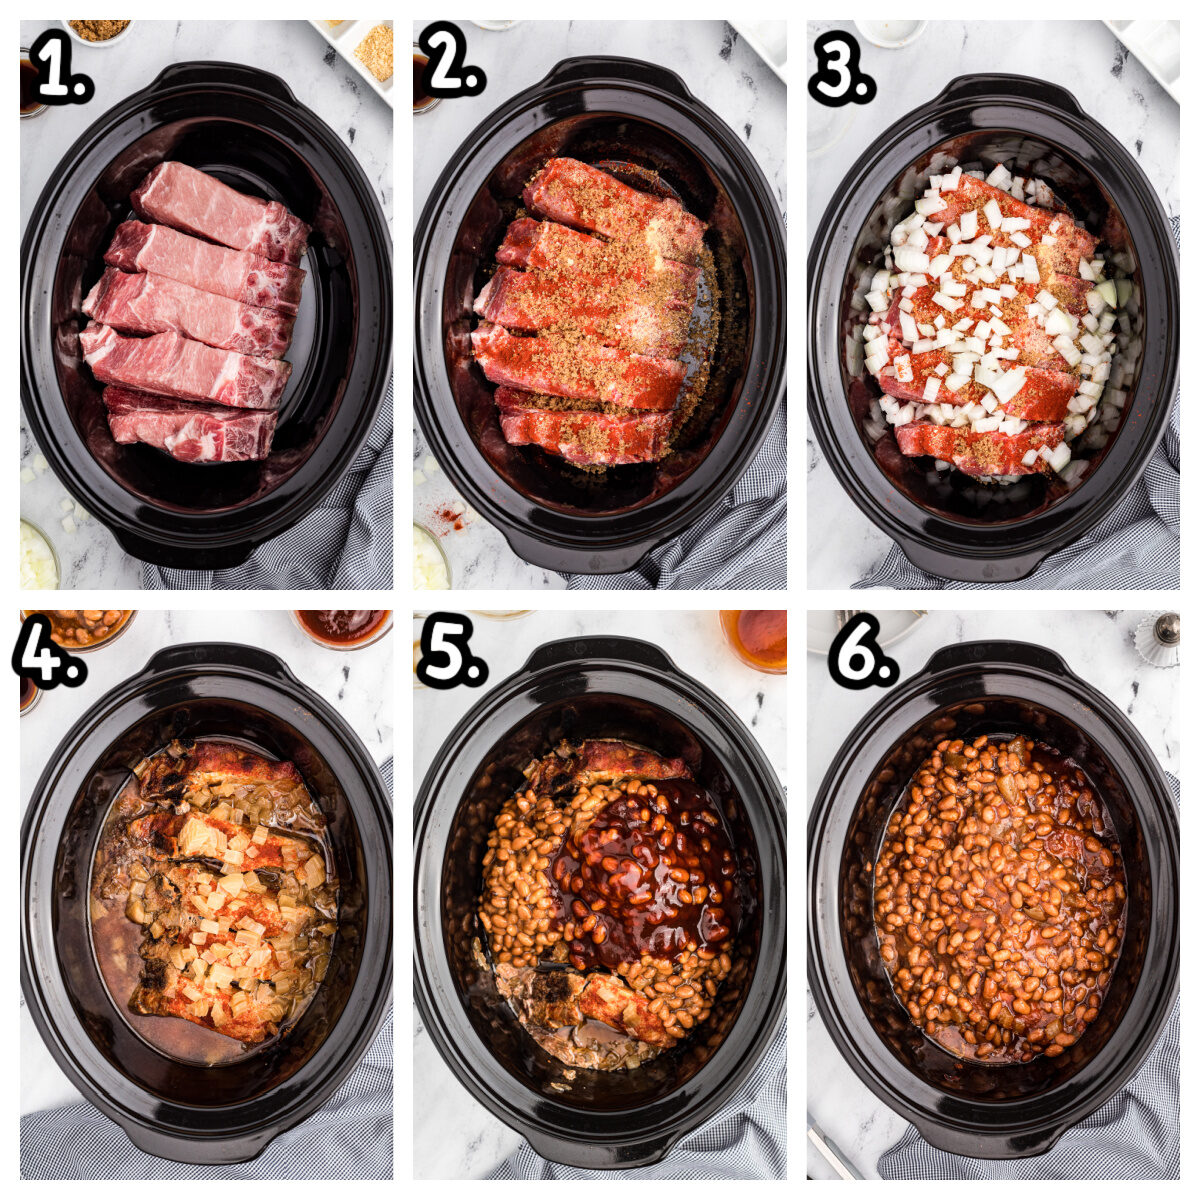 Six images of how to assemble country style ribs and baked beans in the slow cooker.